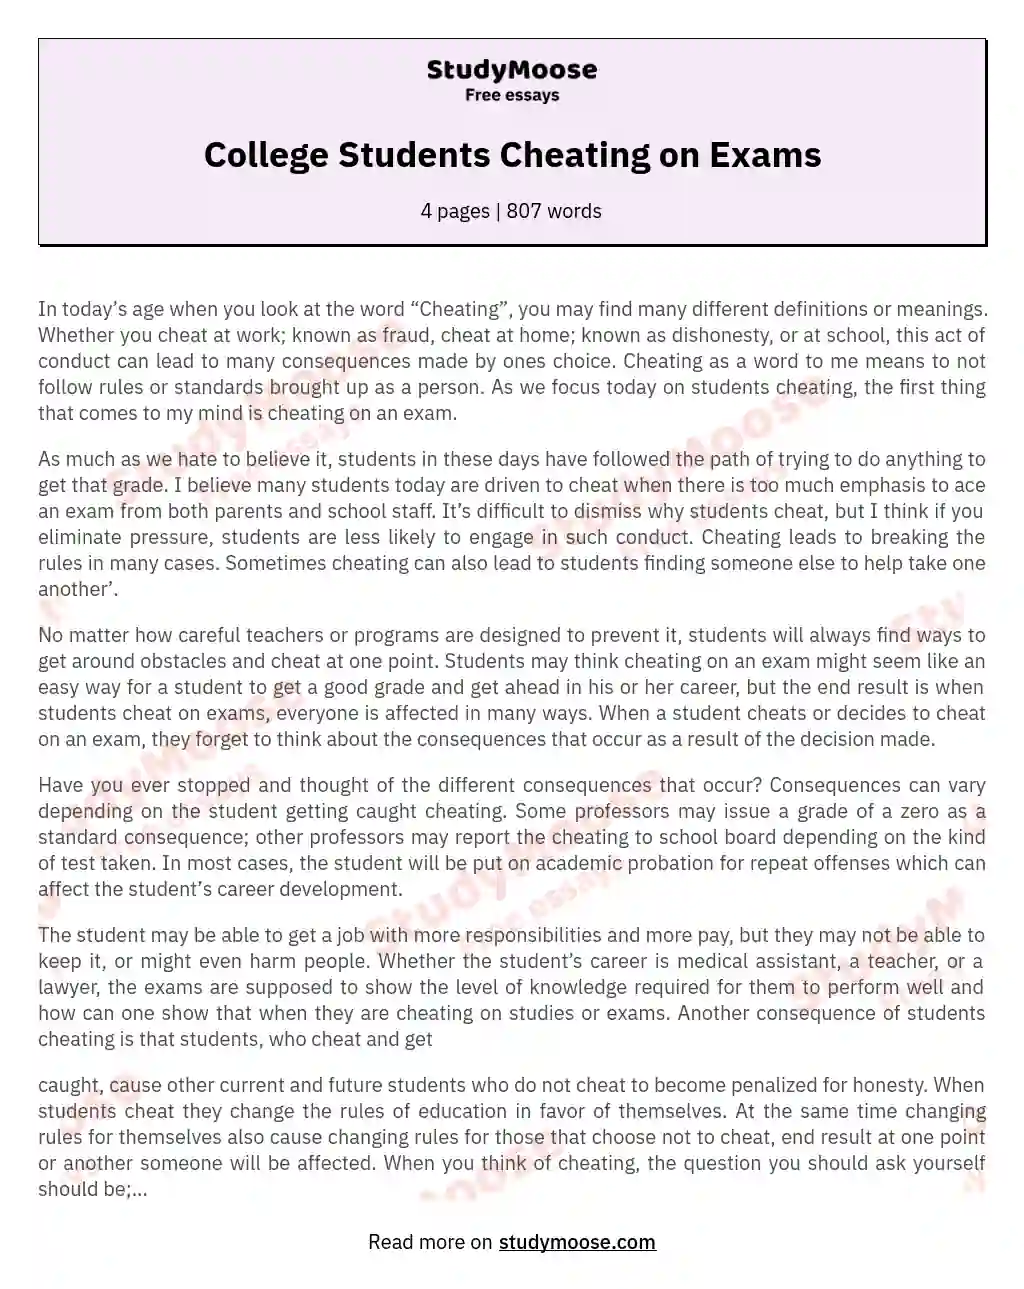 College Students Cheating on Exams essay